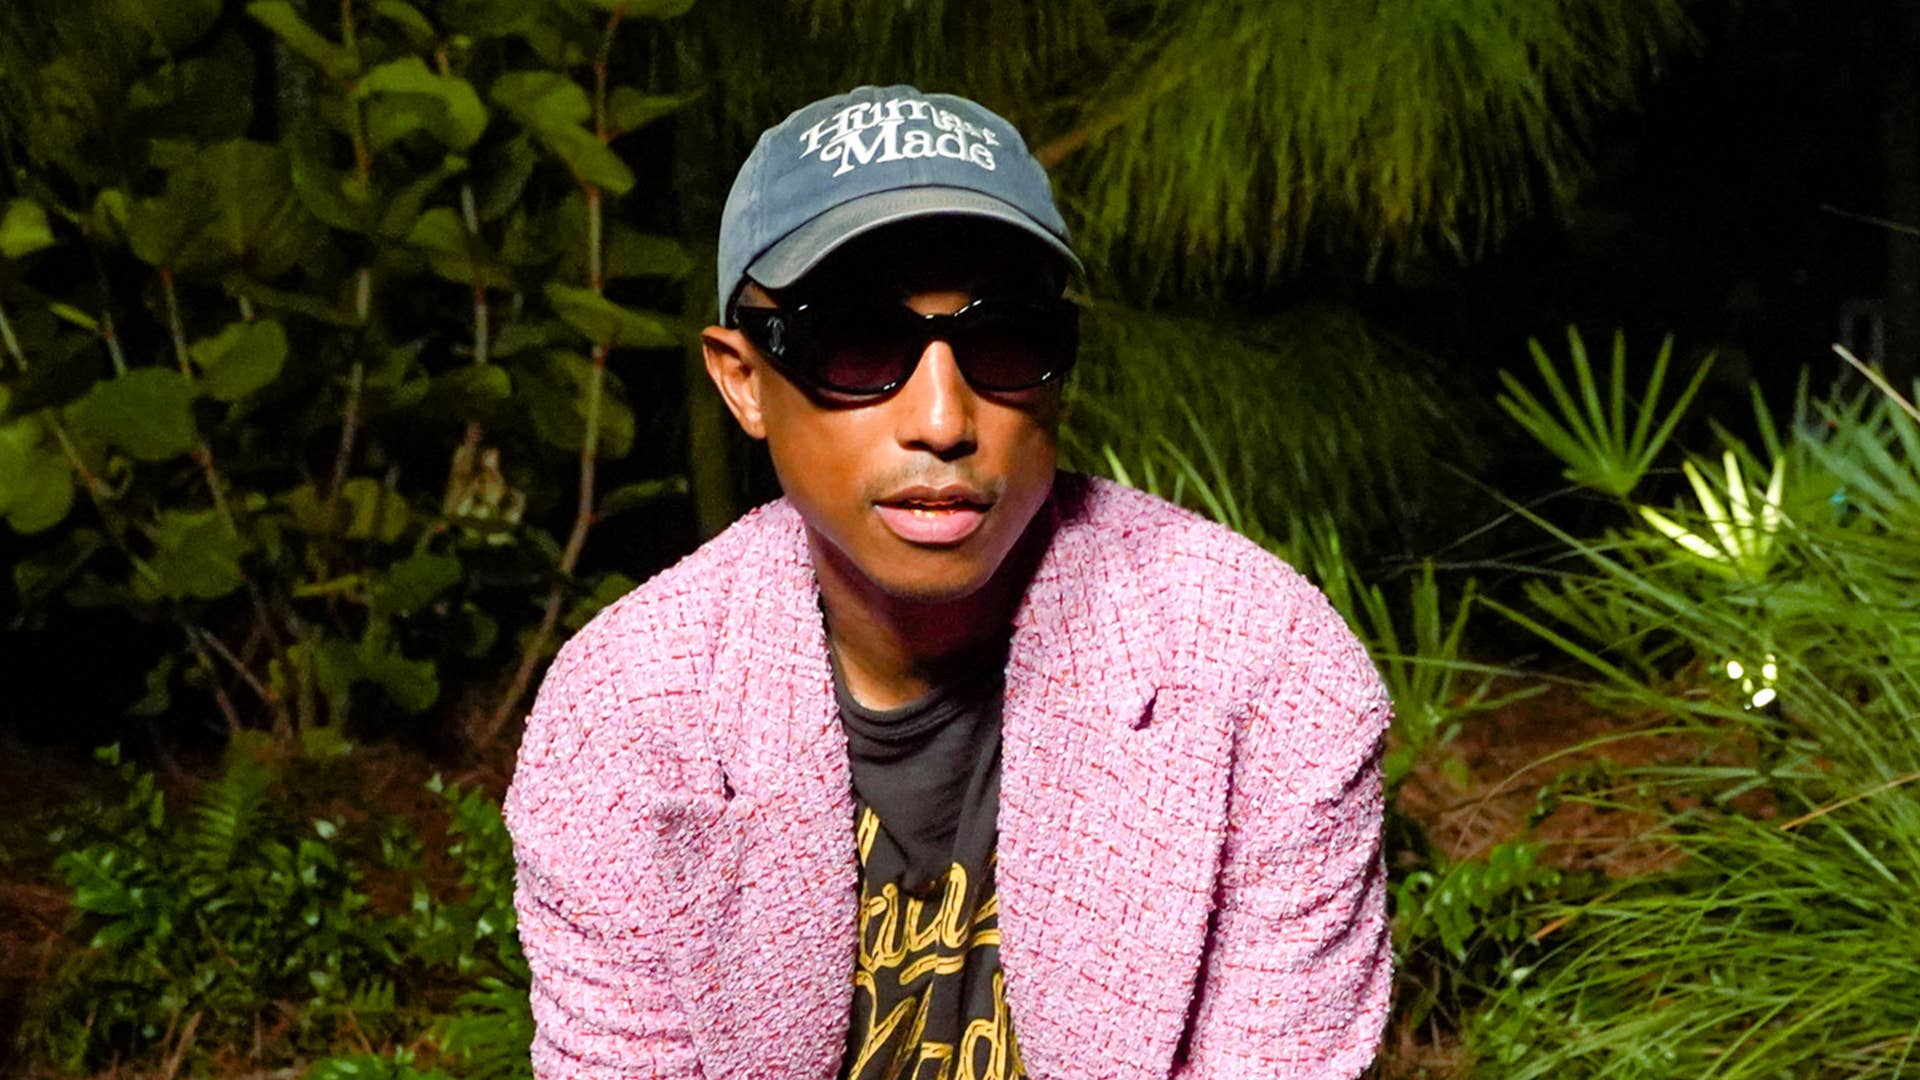 Pharrell Williams Announces Return Of 'Something In The Water